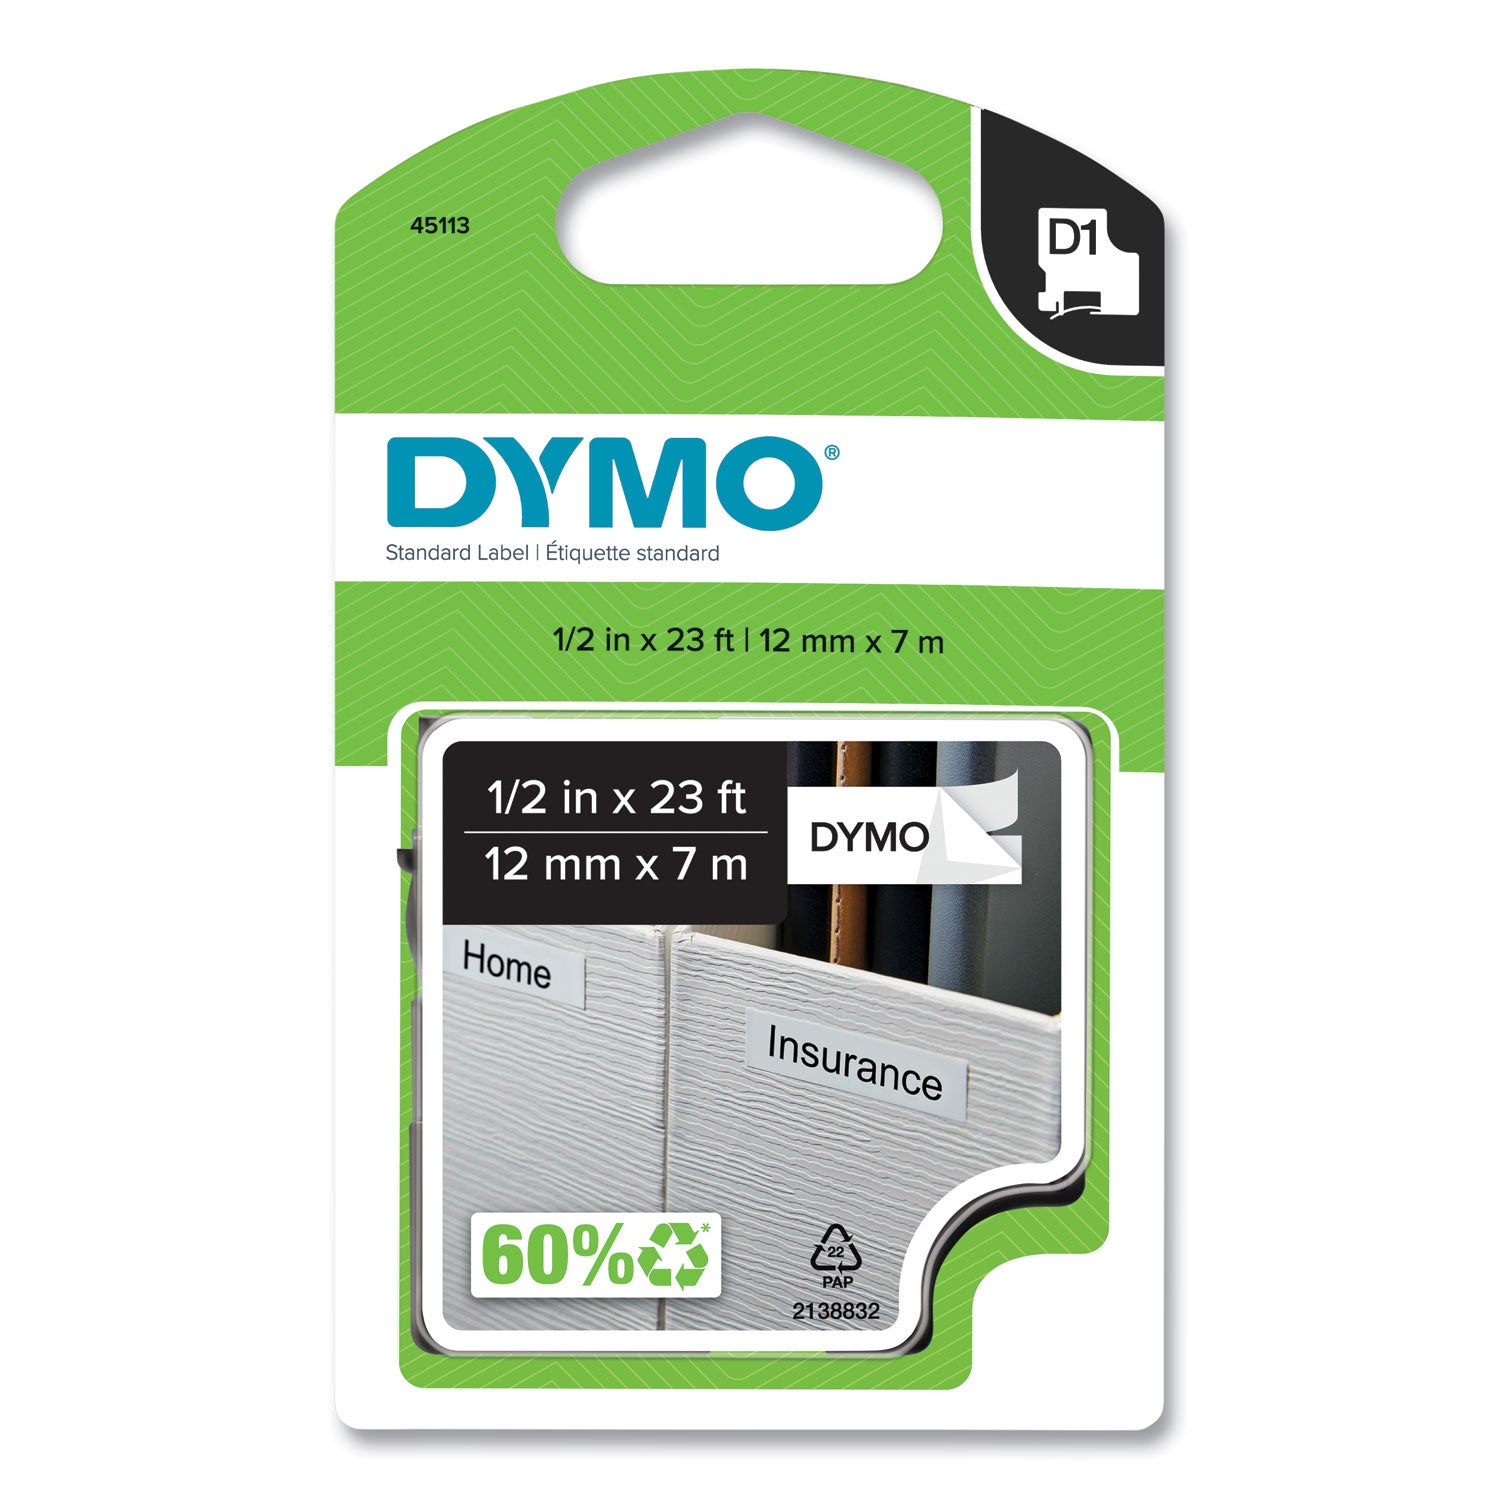 d1-high-performance-polyester-removable-label-tape-05-x-23-ft-black-on-white_dym45113 - 1